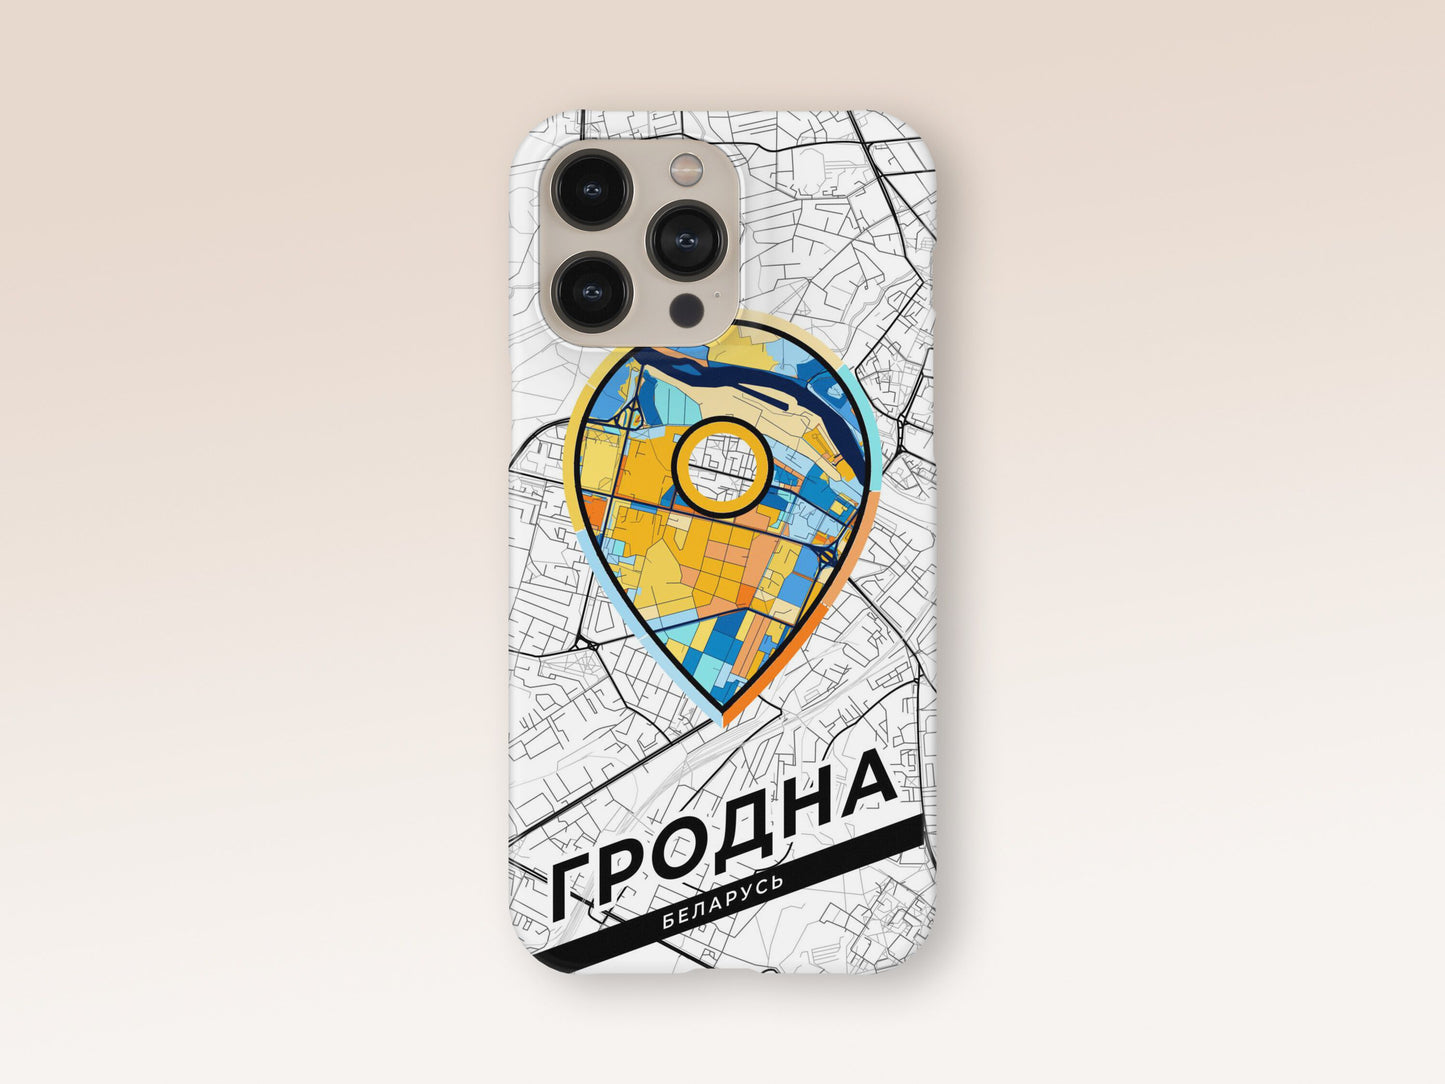 Гродна Беларусь slim phone case with colorful icon. Birthday, wedding or housewarming gift. Couple match cases. 1